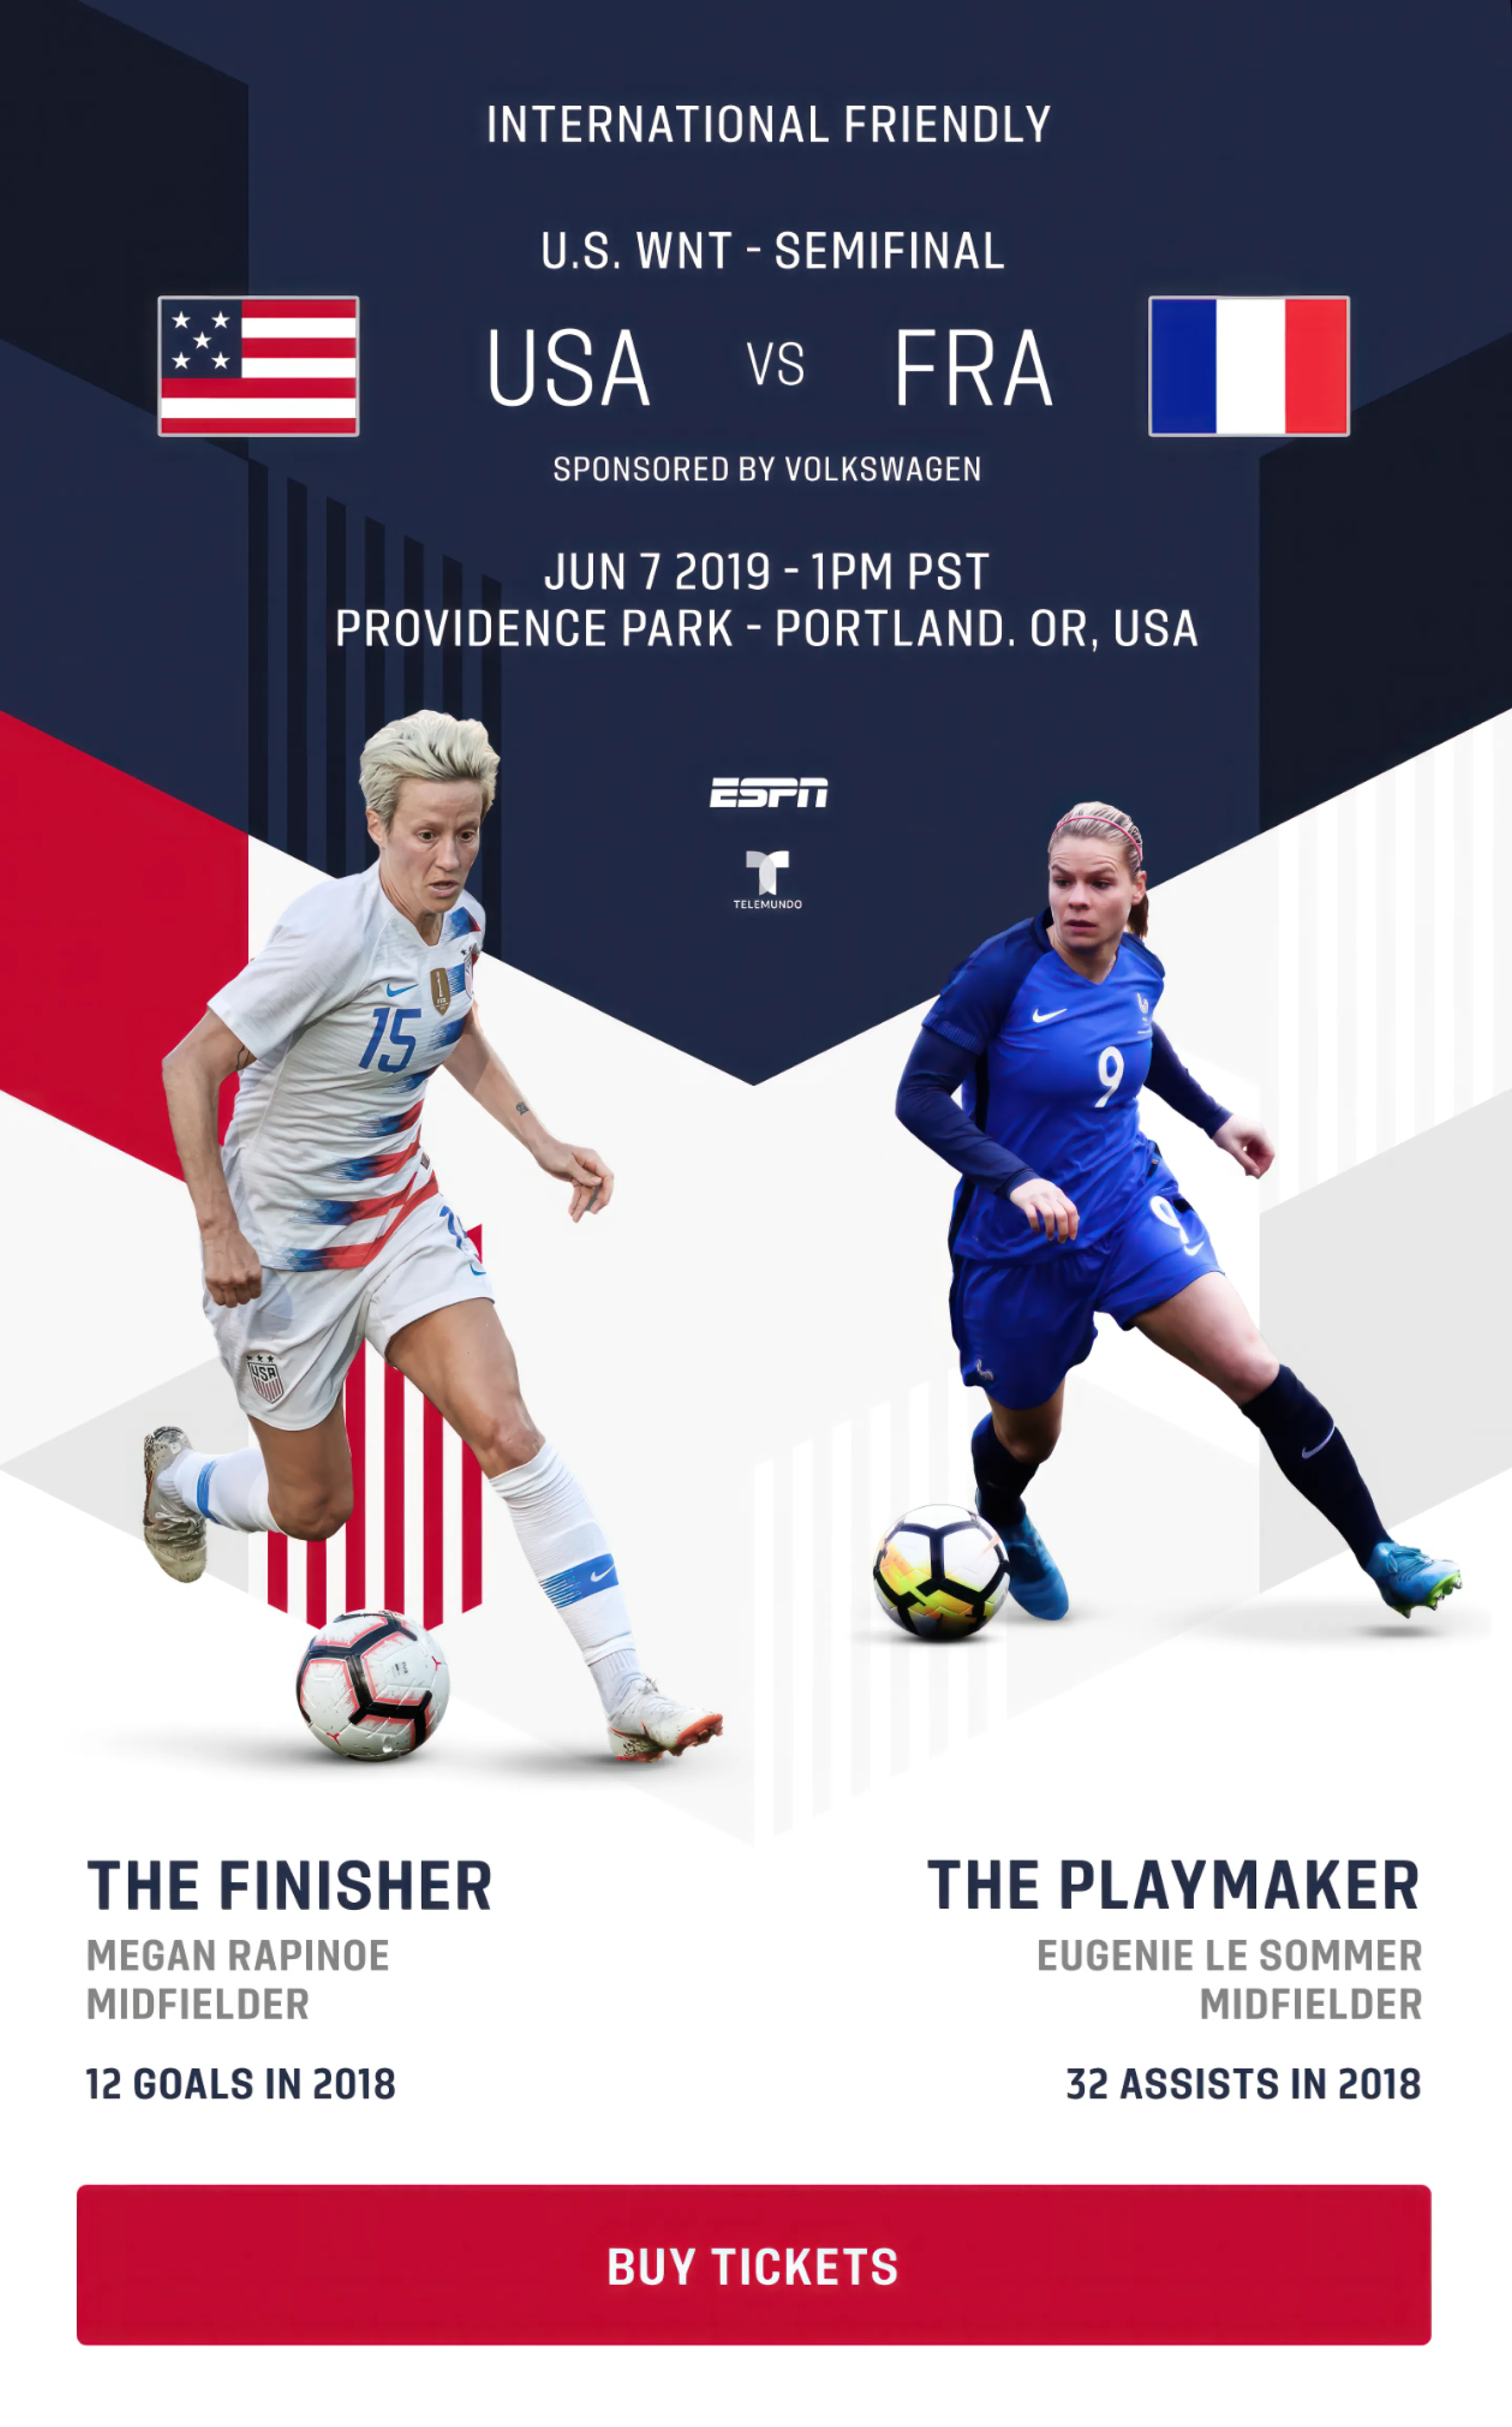 Match screen with Megan Rapinoe and Eugenie Le Sommer